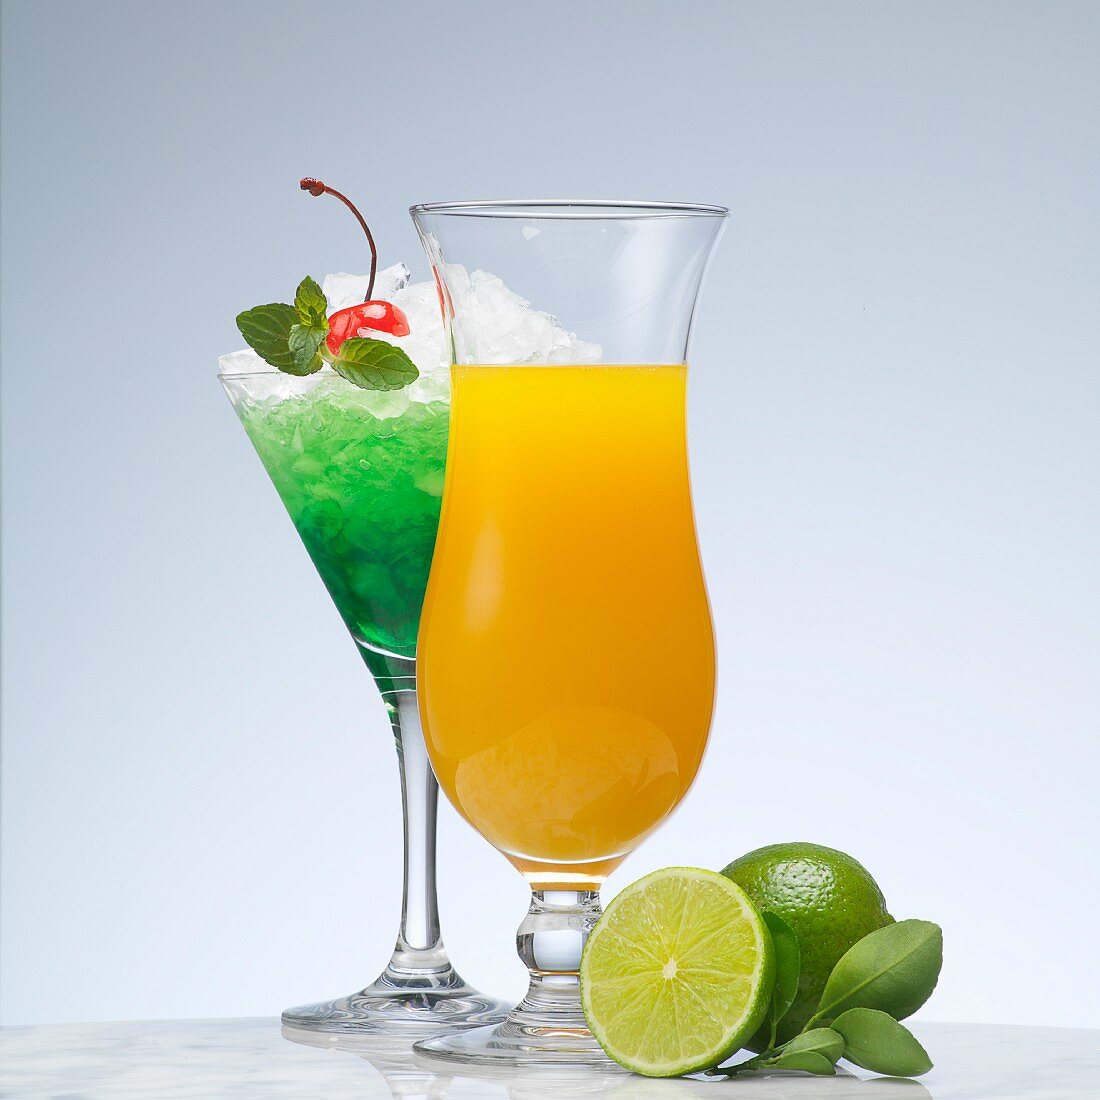 A green cocktail made with peppermint liqueur and a yellow cocktail made with vodka